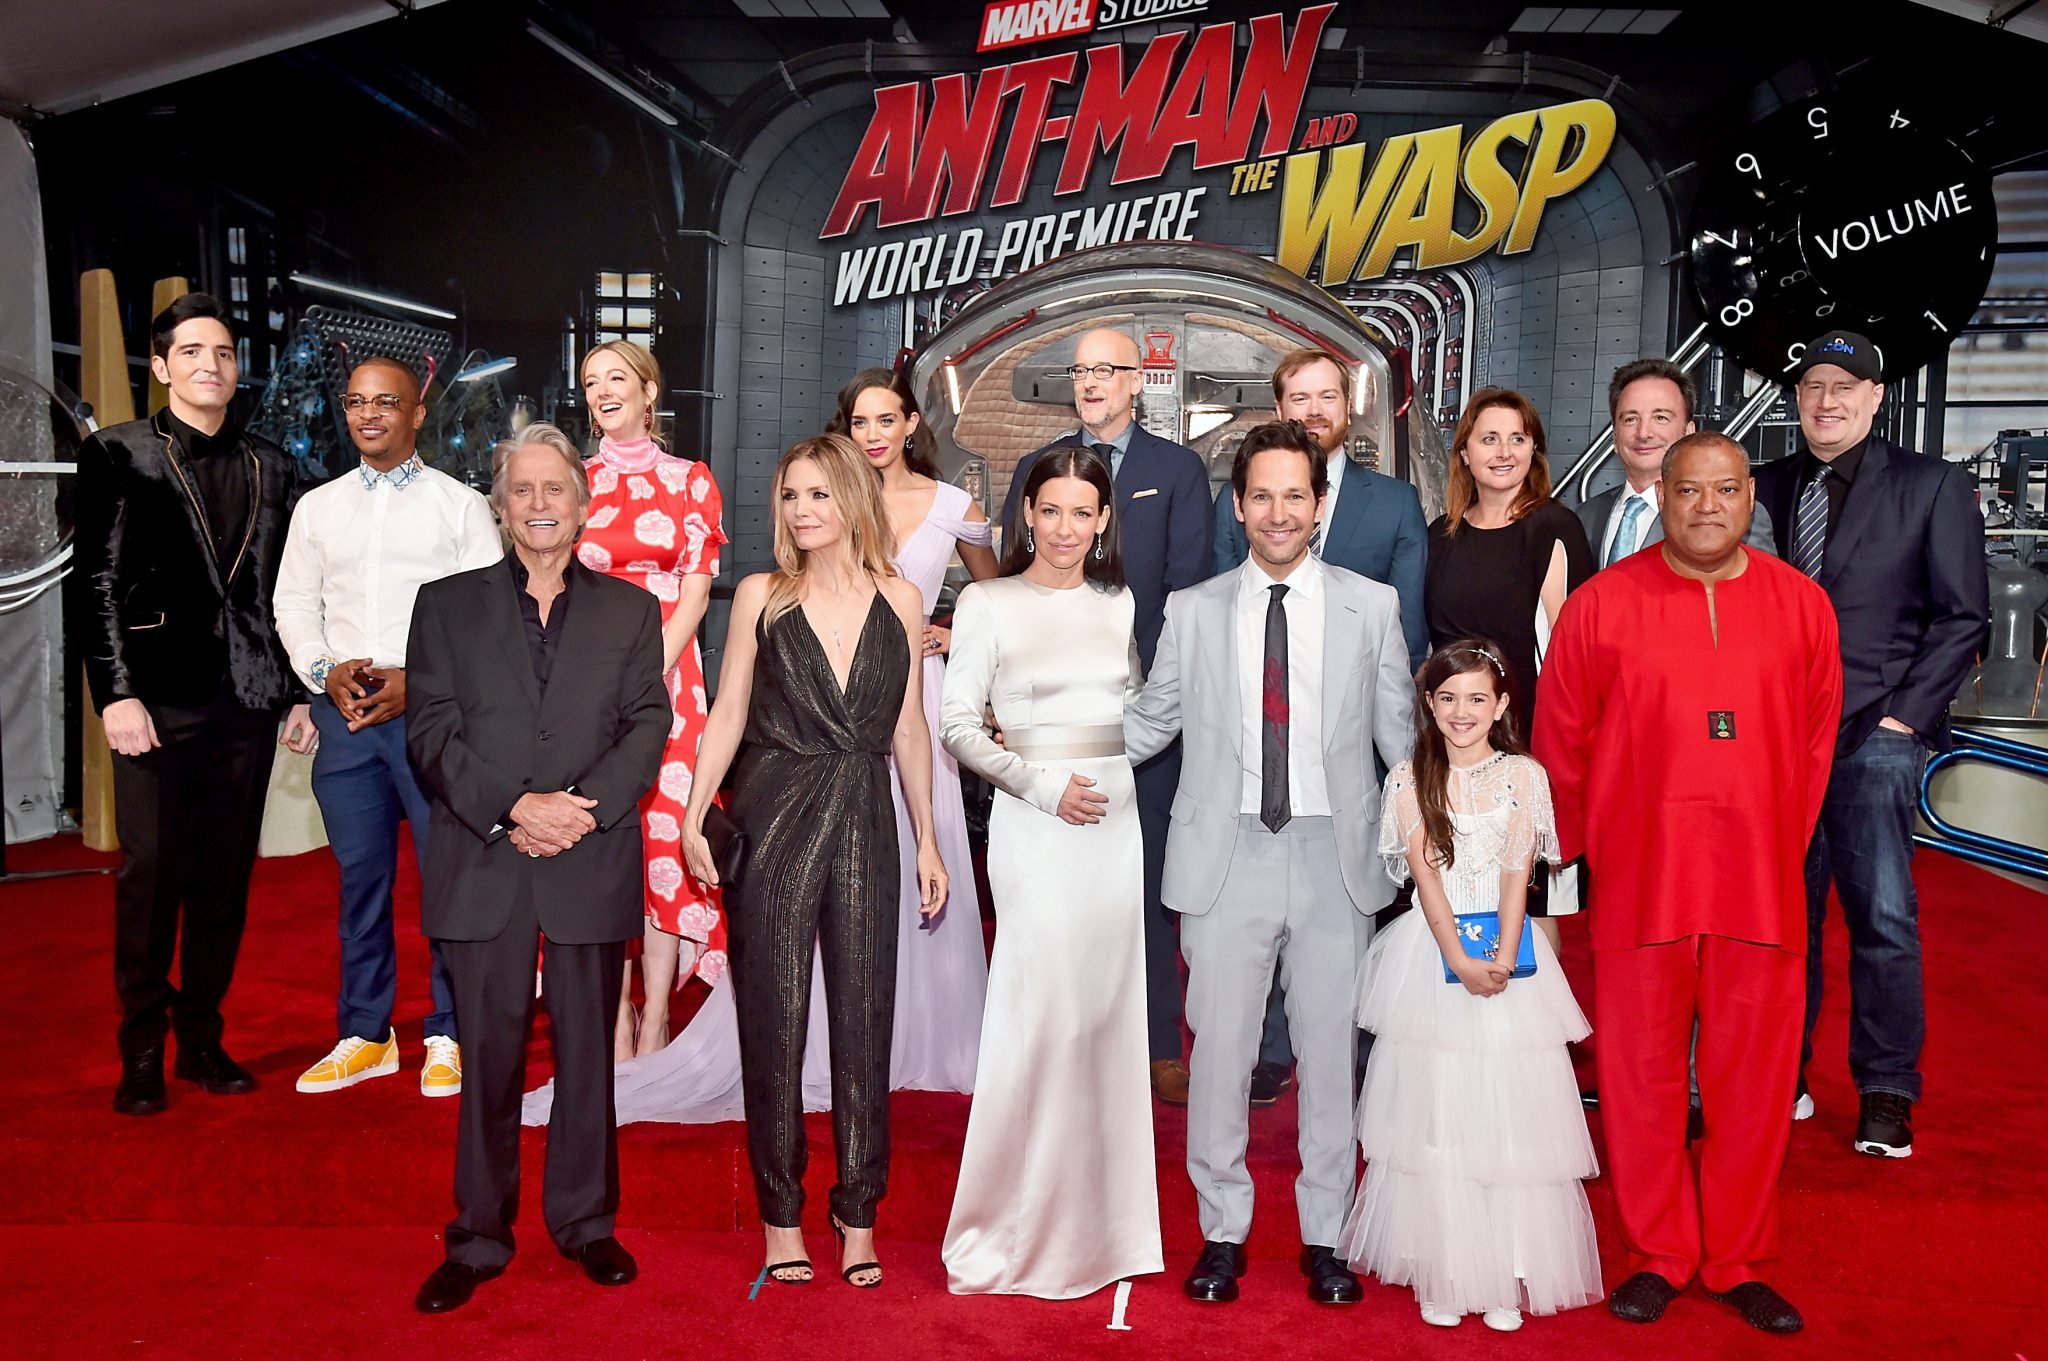 Los Angeles Global Premiere For Marvel Studios’ “Ant-Man And The Wasp”